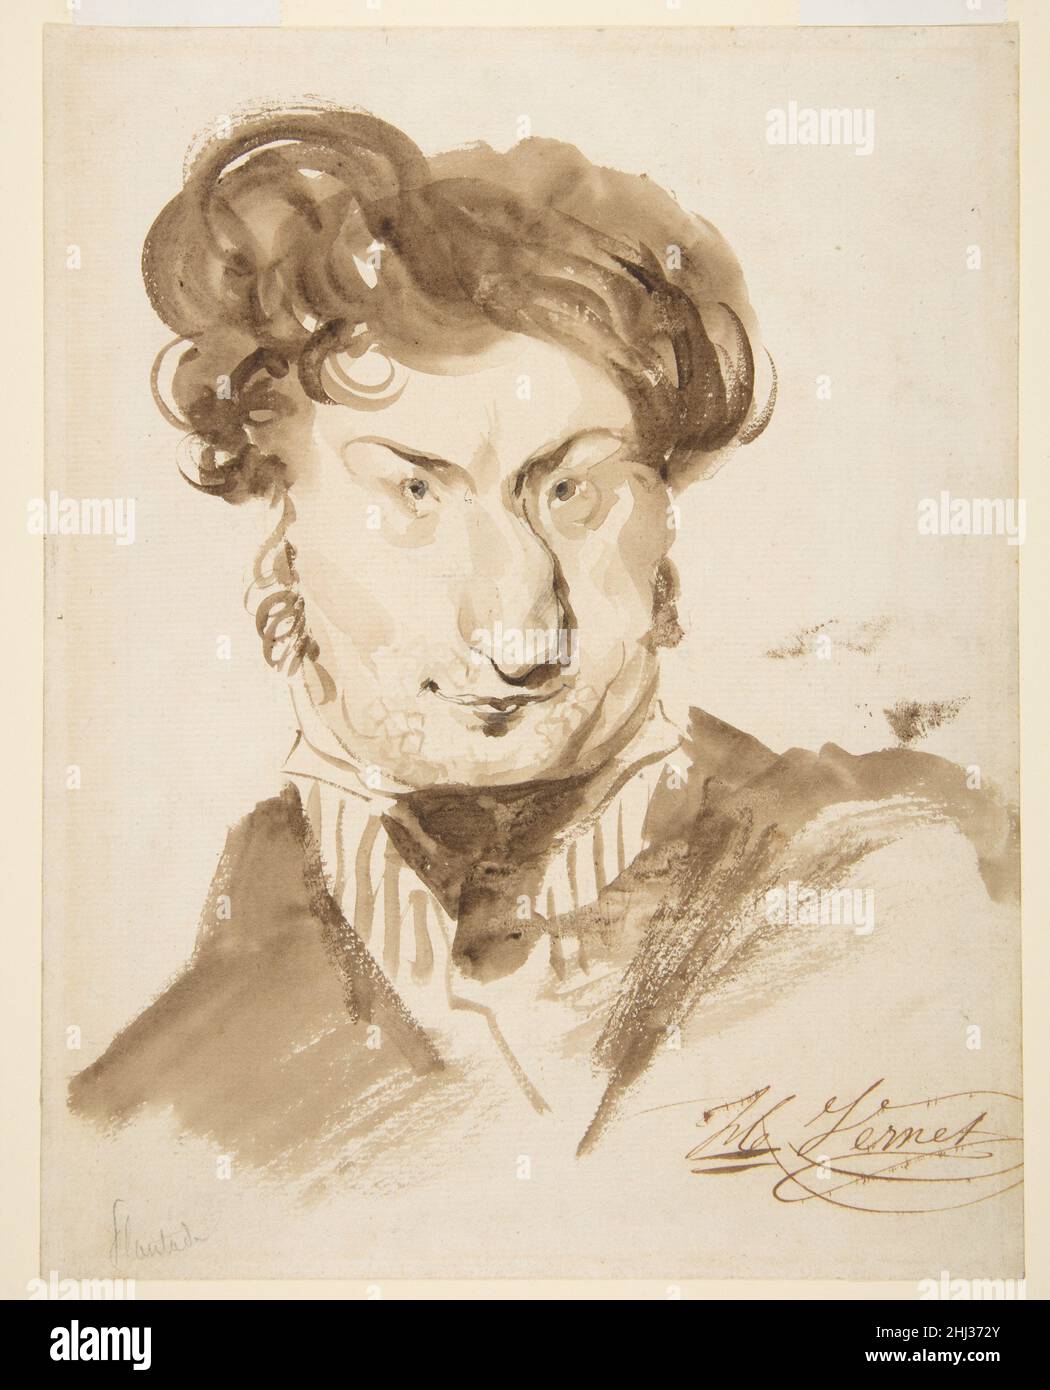 Caricature of Charles-Henri Plantade (?) 19th century Horace Vernet French Vernet is best known as an accomplished history painter, but like many academic artists of his day, including his teacher François -André Vincent, he also made caricatures. Among these were numerous drawings of friends and acquaintances as well as sketches of fellow Academicians during the meetings of the Institut de France. This wonderful wsh drawing most likely depicts the Romantic composer Charles-Henri Plantade. A lightly traced inscription in graphite at the bottom left appears to read 'Plantade,'and the image rese Stock Photo